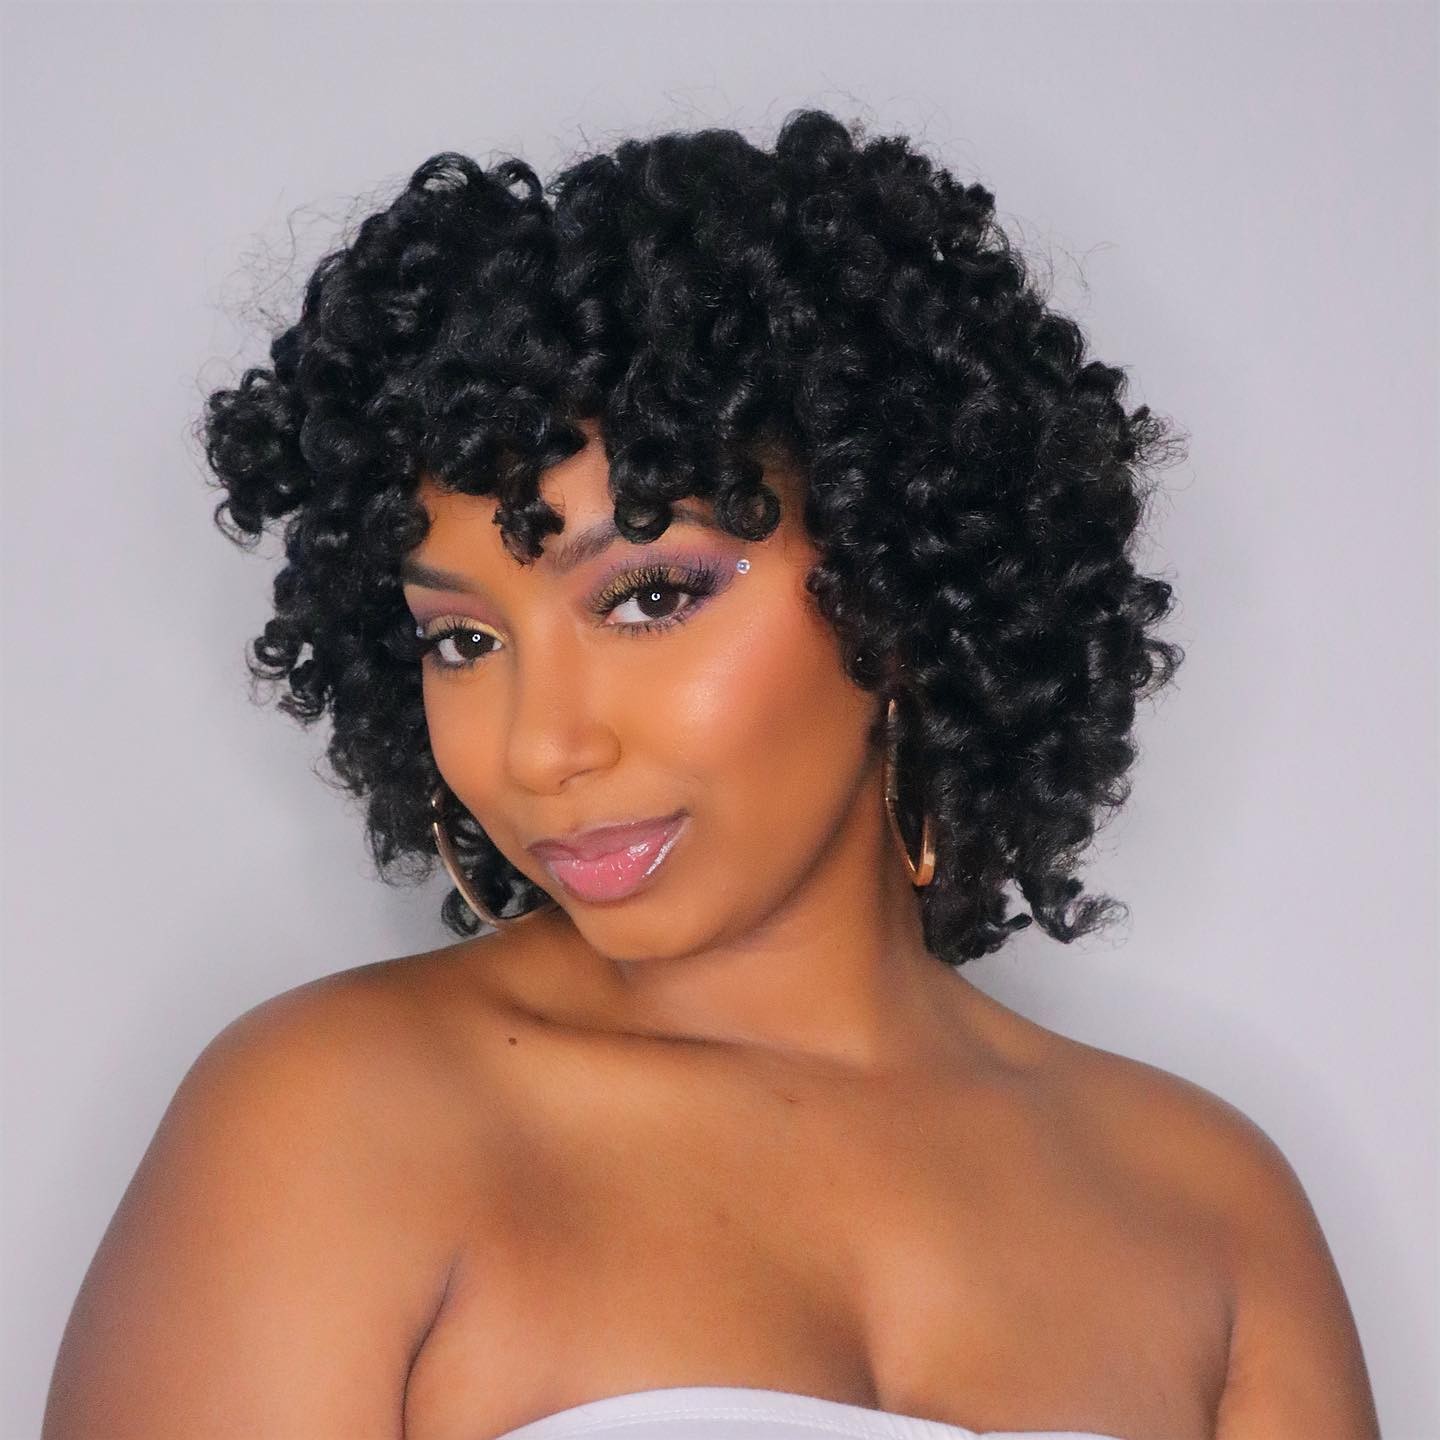 woman with a smooth and bouncy flexi rod set natural hairstyle holding a leave in moisturizing cream for natural hair